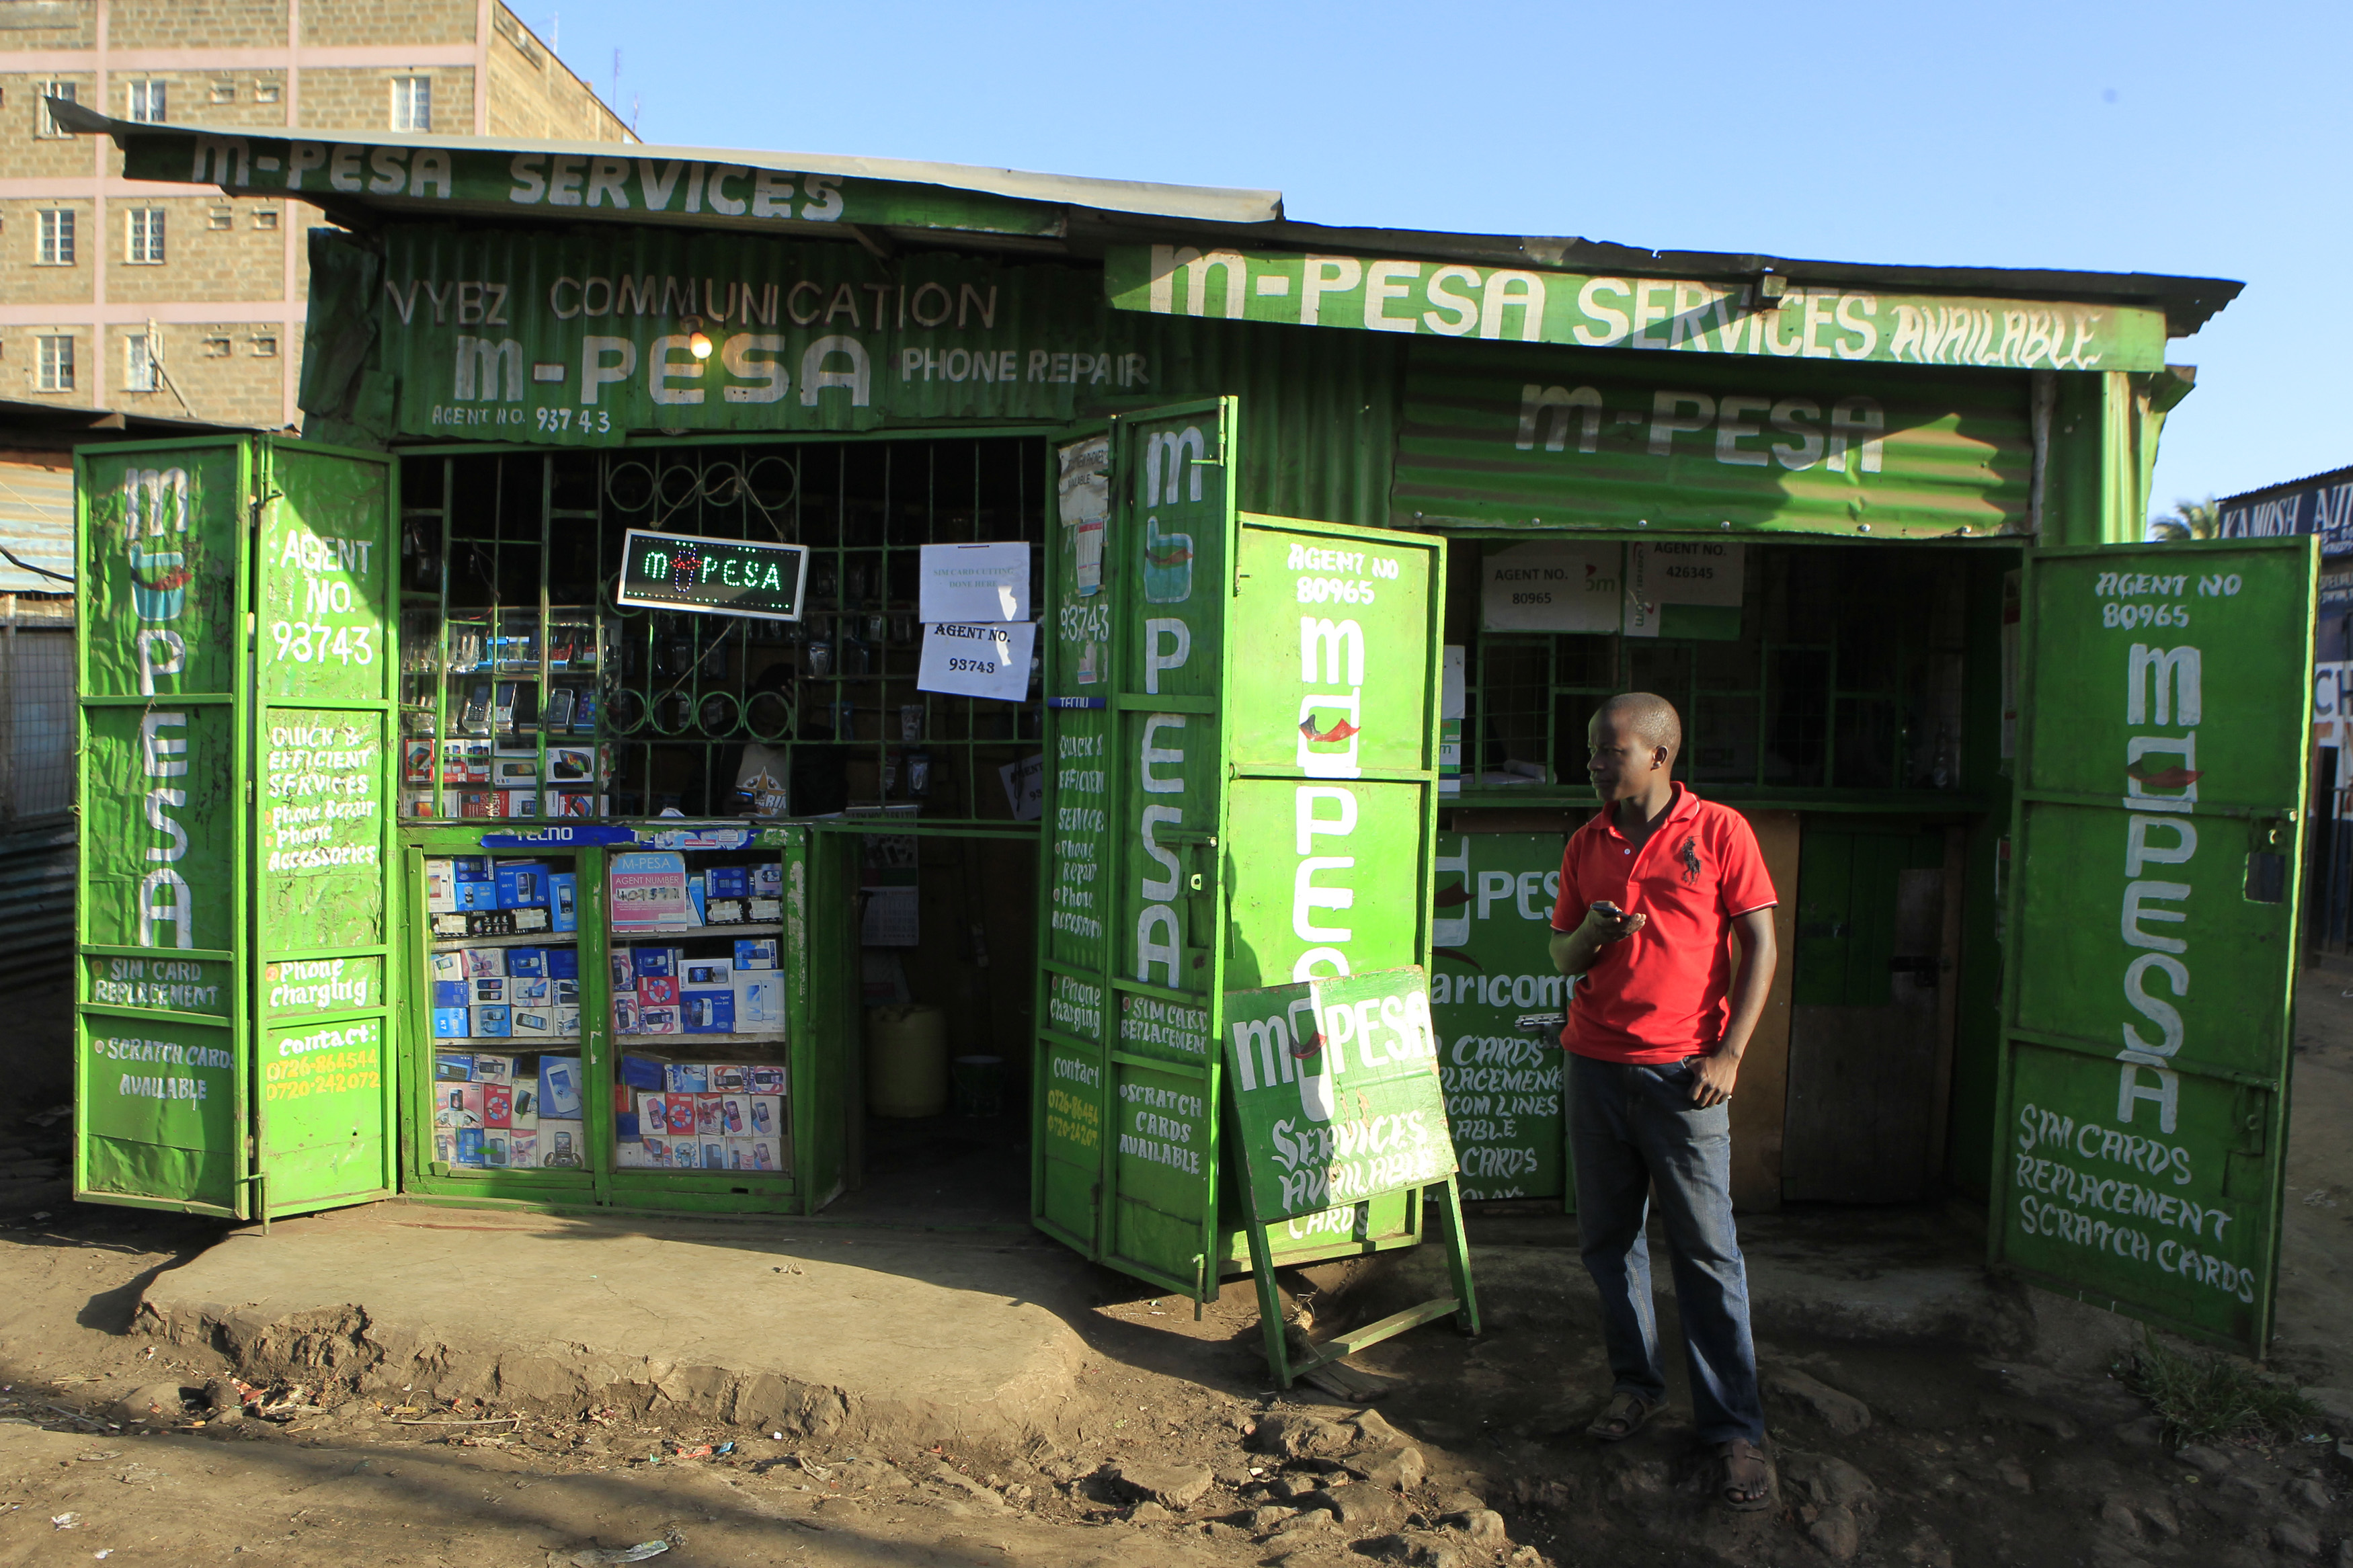 A man waits for M-Pesa customers at his shop in Kibera in Kenya's capital Nairobi December 31, 2014. Safaricom, Kenya's biggest telecoms firm, is a model of how technology can be used to financially include millions of people with mobile telephones but without access to traditional infrastructure such as the banks that are available to the wealthy or those living in cities. Safaricom in 2007 pioneered its M-Pesa mobile money transfer technology, now used across Africa, Asia and Europe. It proved that money can be made from people who earn a few dollars a day.  REUTERS/Noor Khamis (KENYA - Tags: BUSINESS SOCIETY SCIENCE TECHNOLOGY TELECOMS)